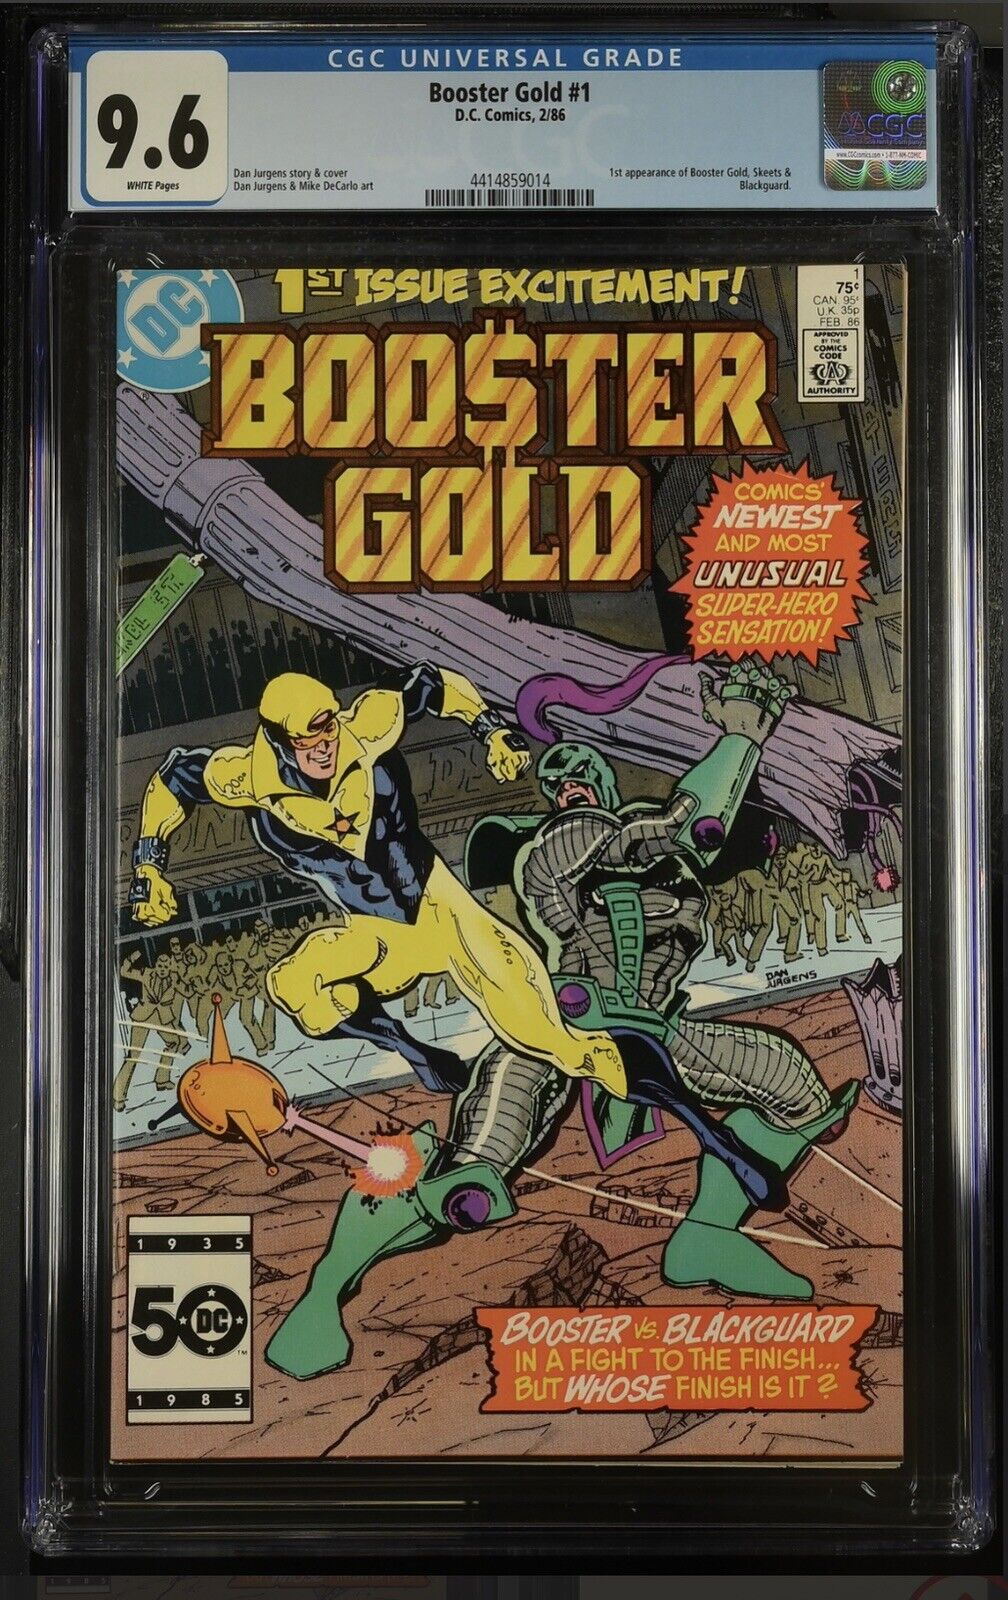 BOOSTER GOLD #1 CGC 9.6 1986 - First app of Booster Gold - White Pages ❄️